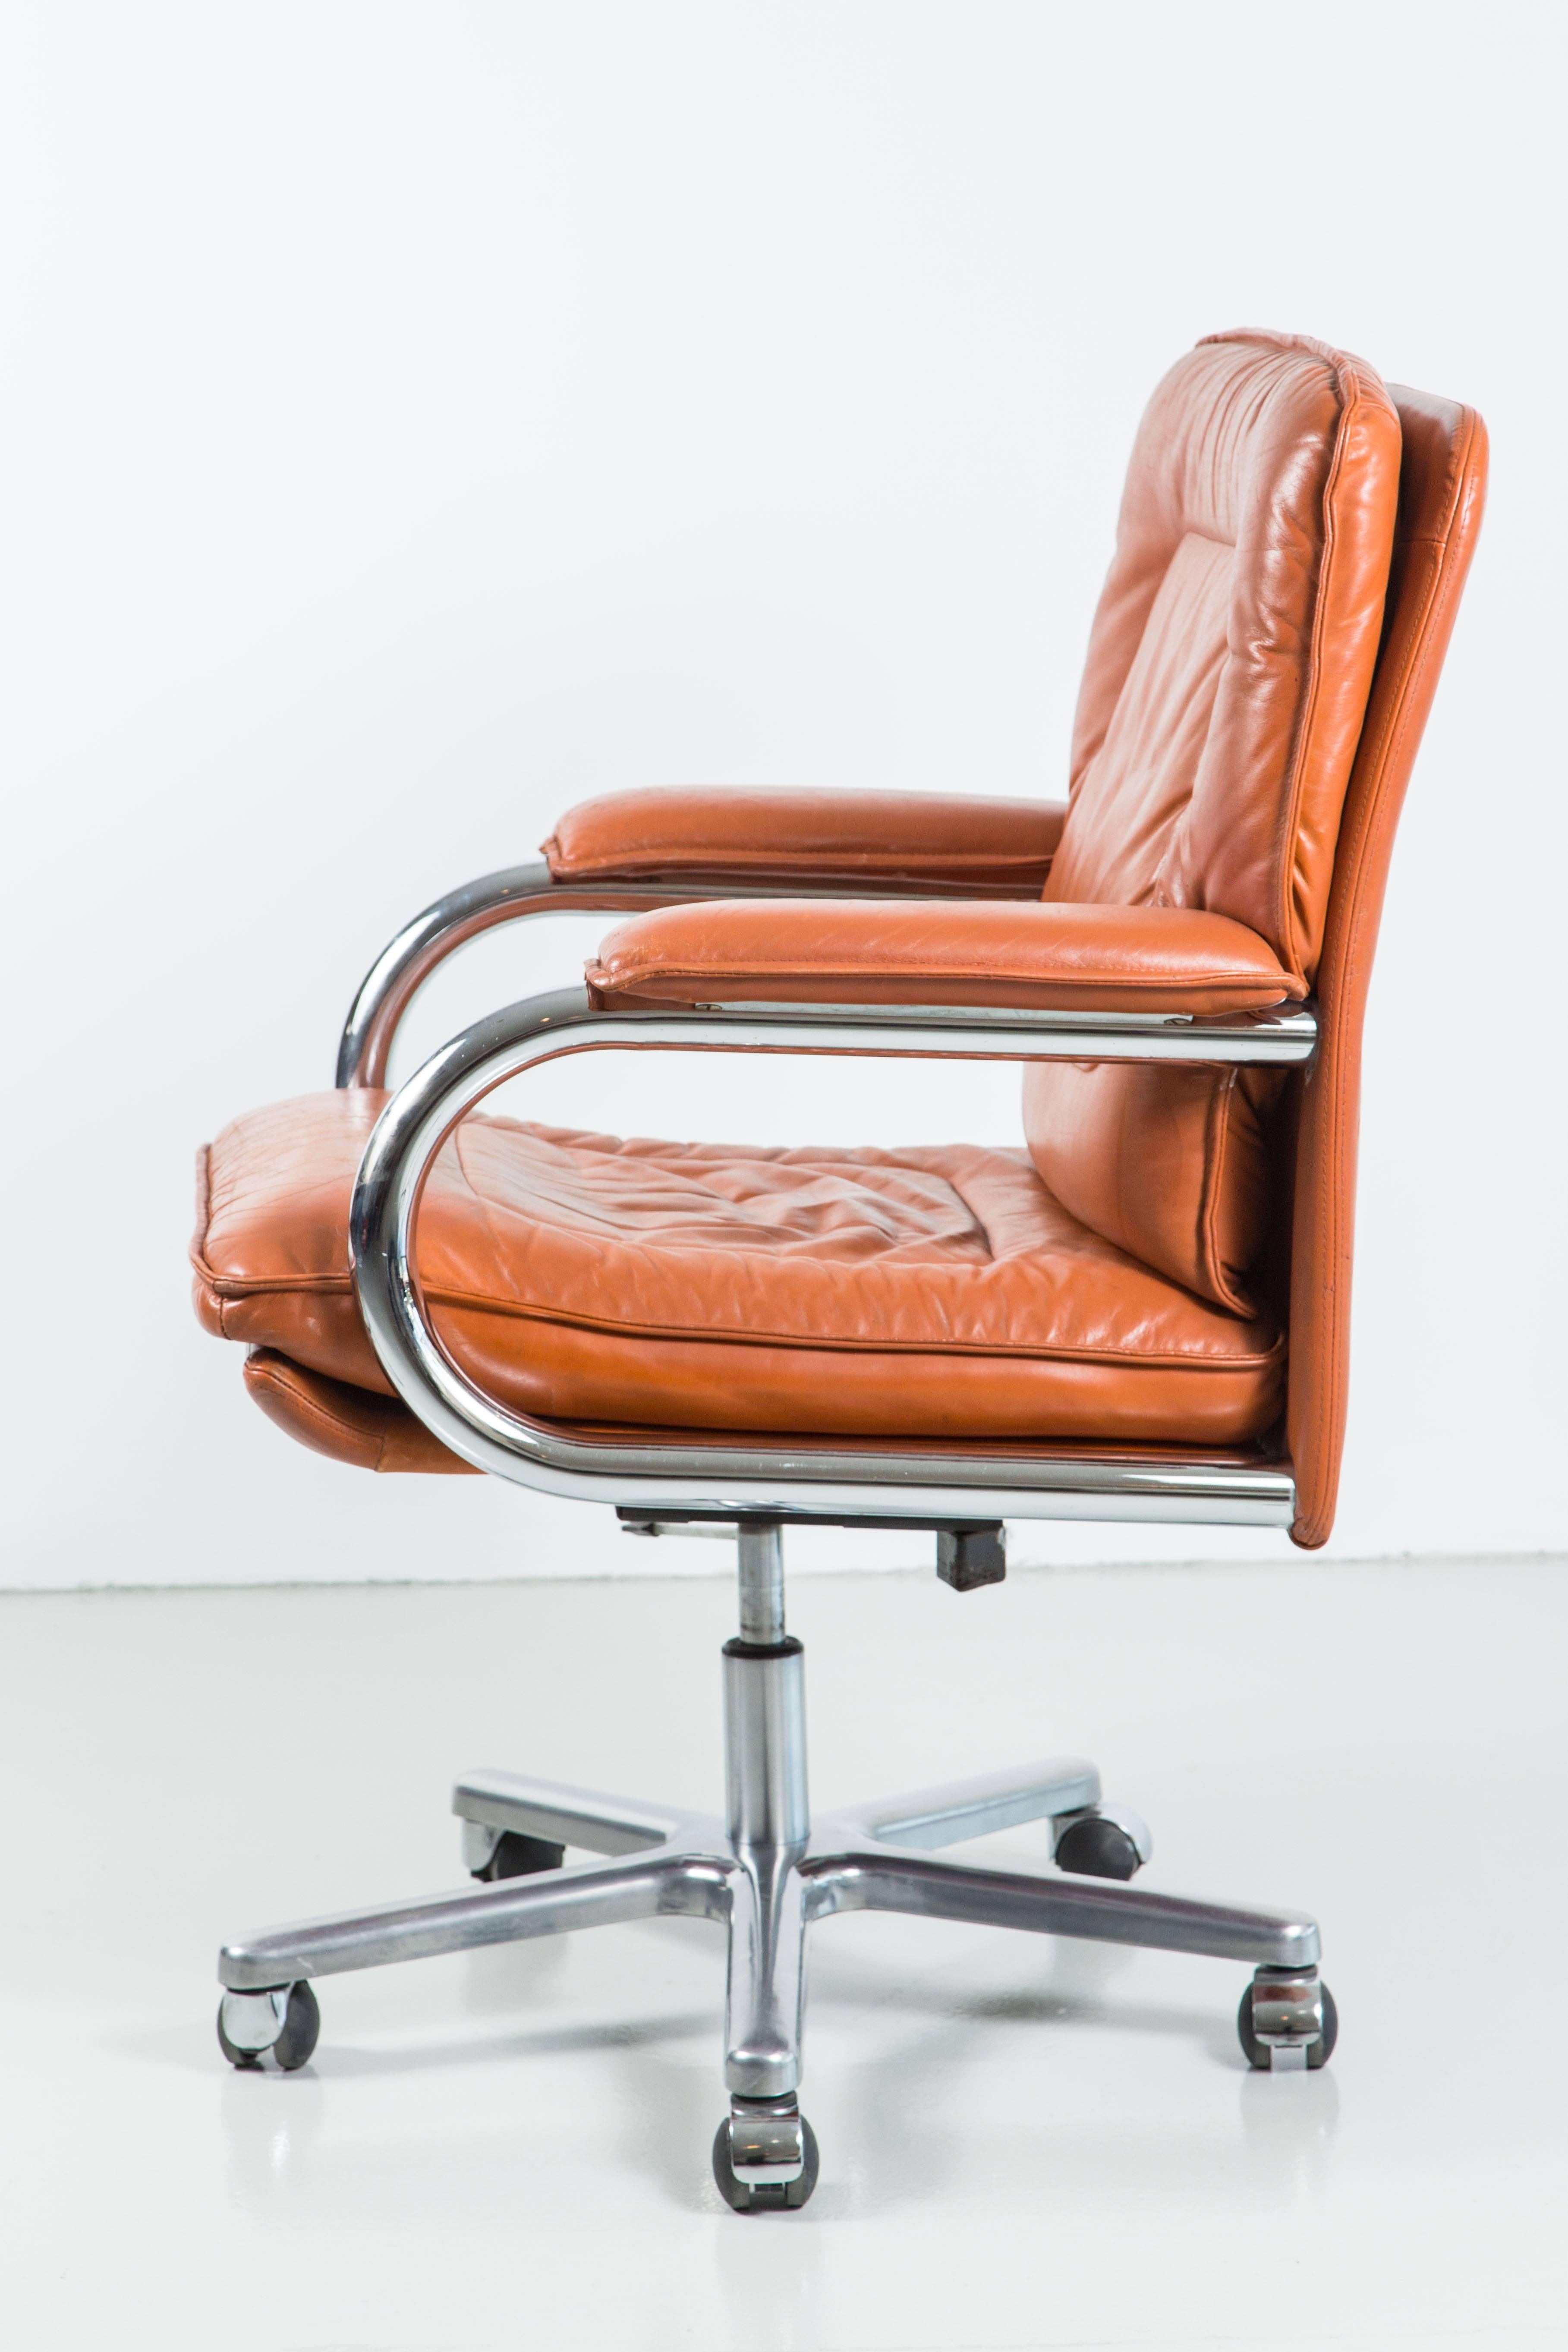 Italian leather desk chair designed by Guido Faleschini for Mariani Pace. Fantastic original Carmel leather with chrome legs and base.
 